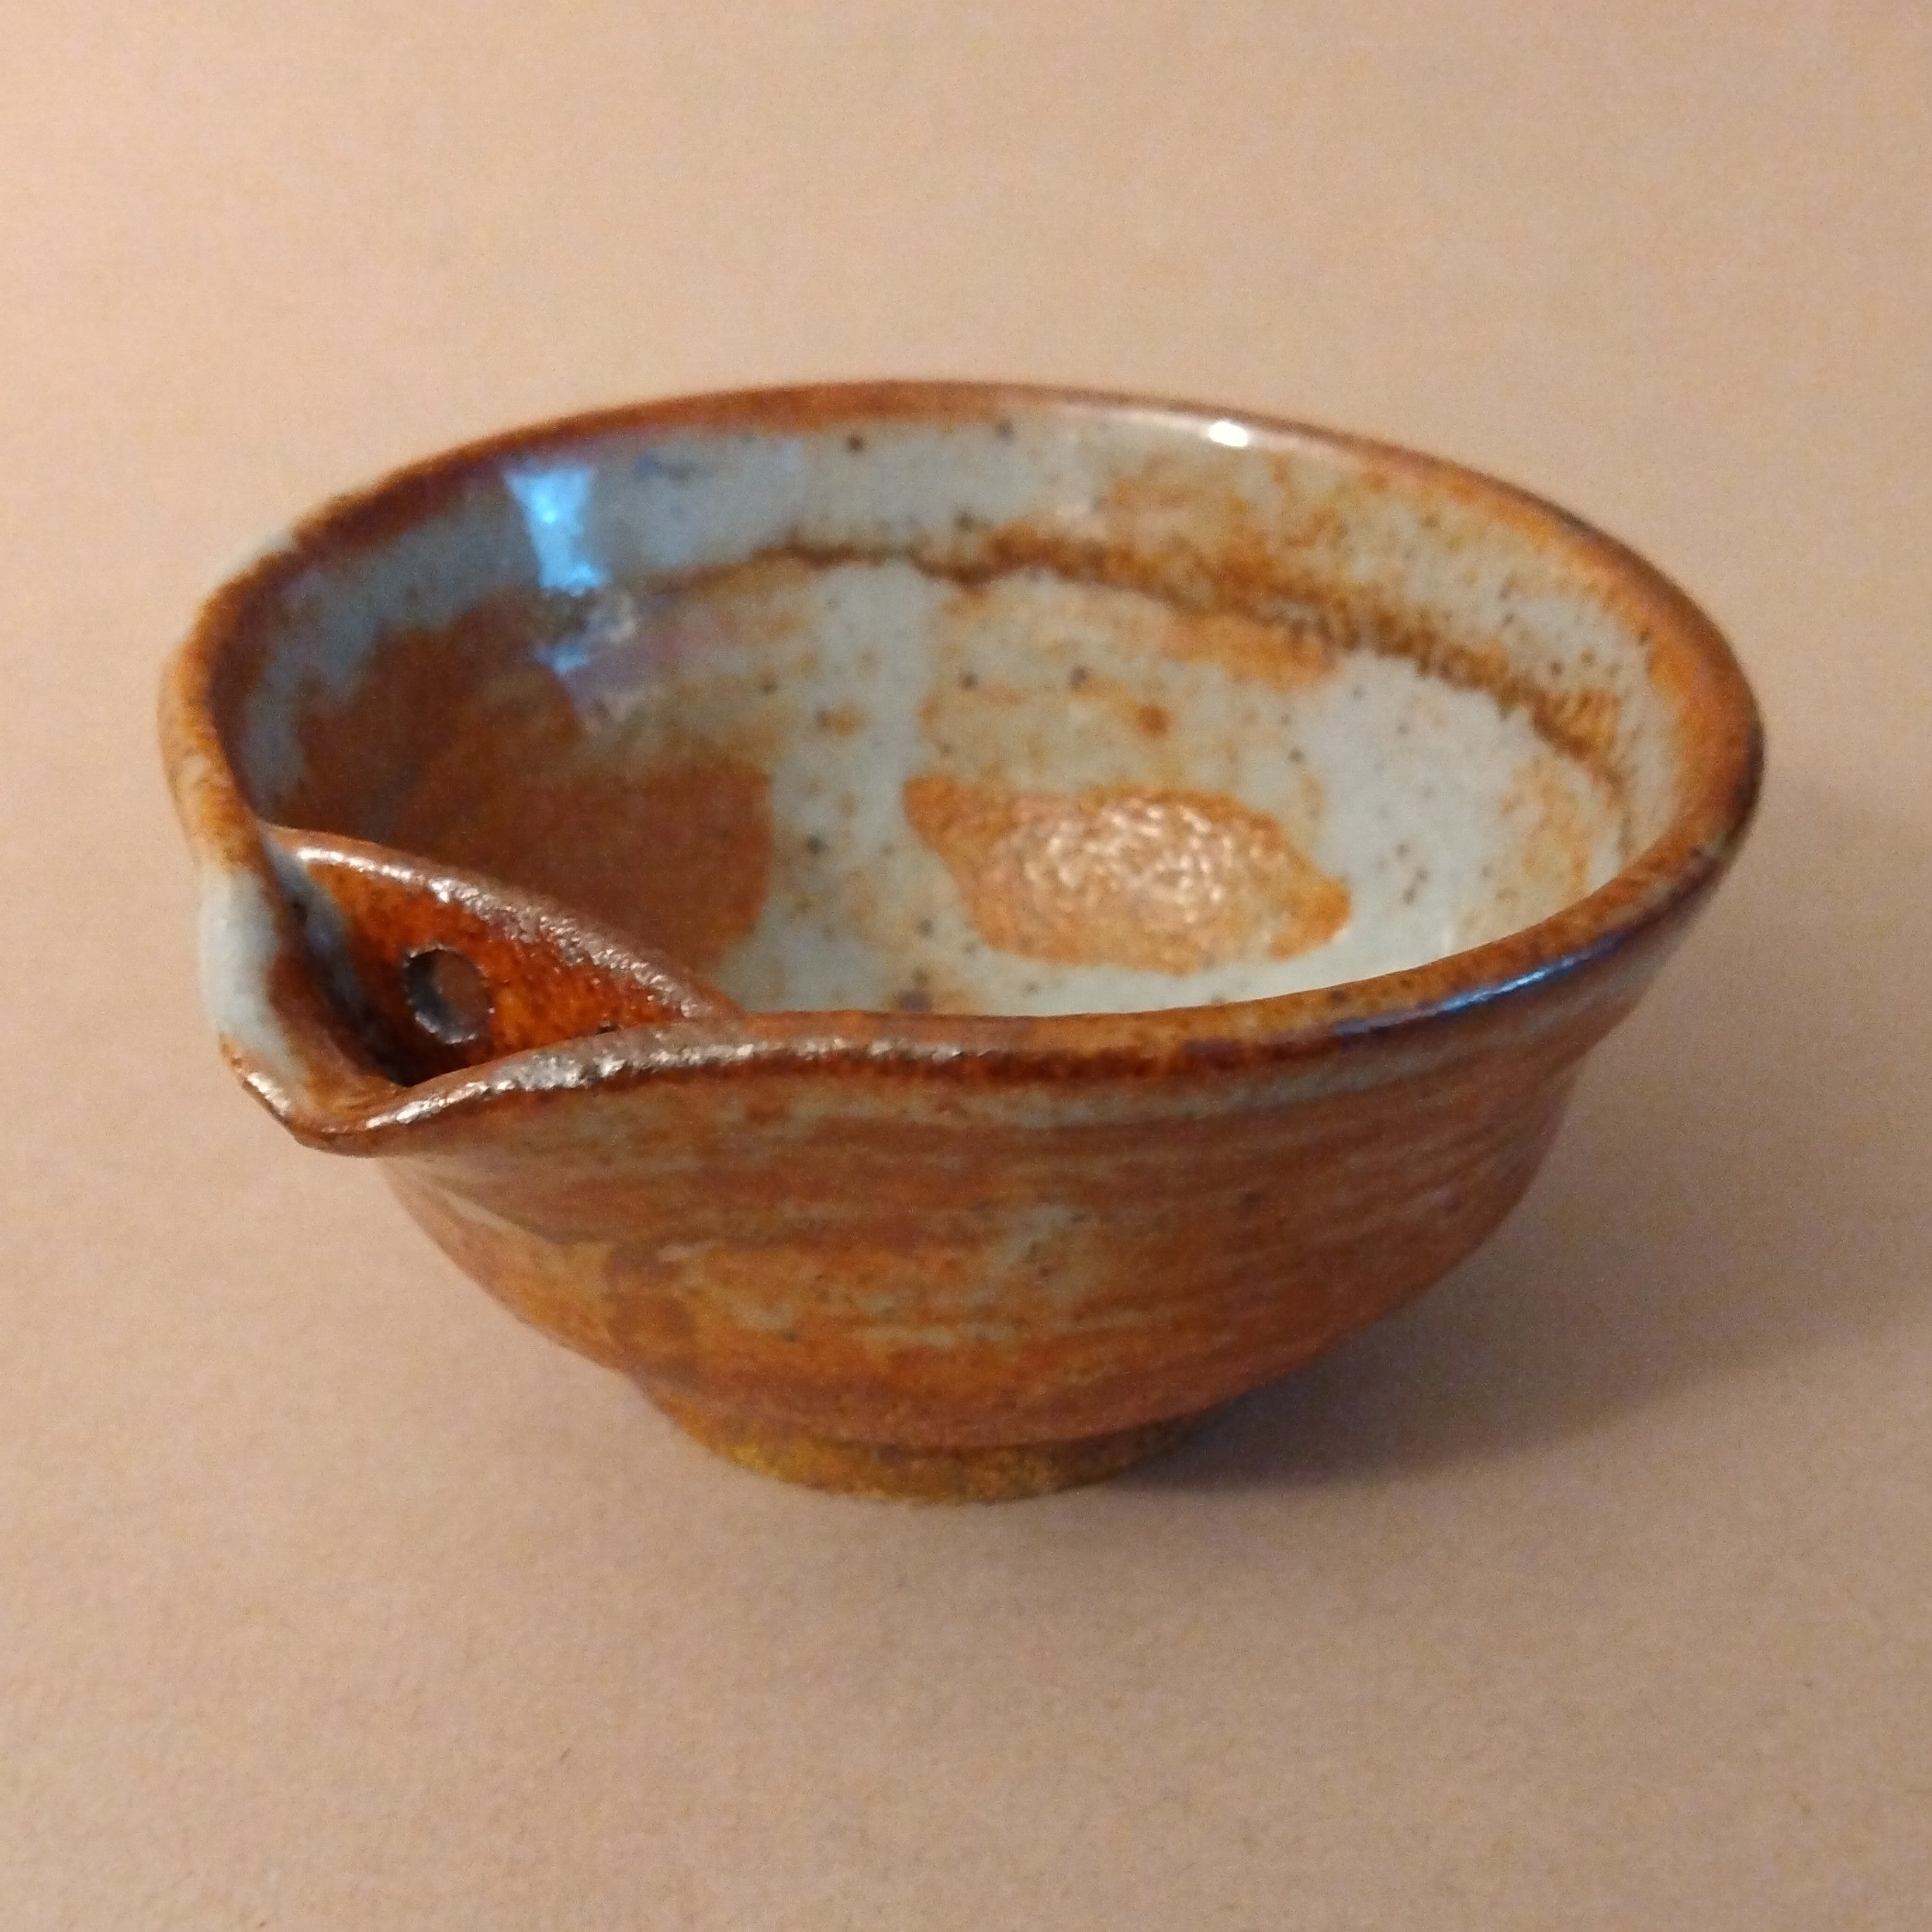 20% to Wajima Earthquake Relief - Katakuchi, Spouted Bowl, with built-in strainer, by George Gledhill